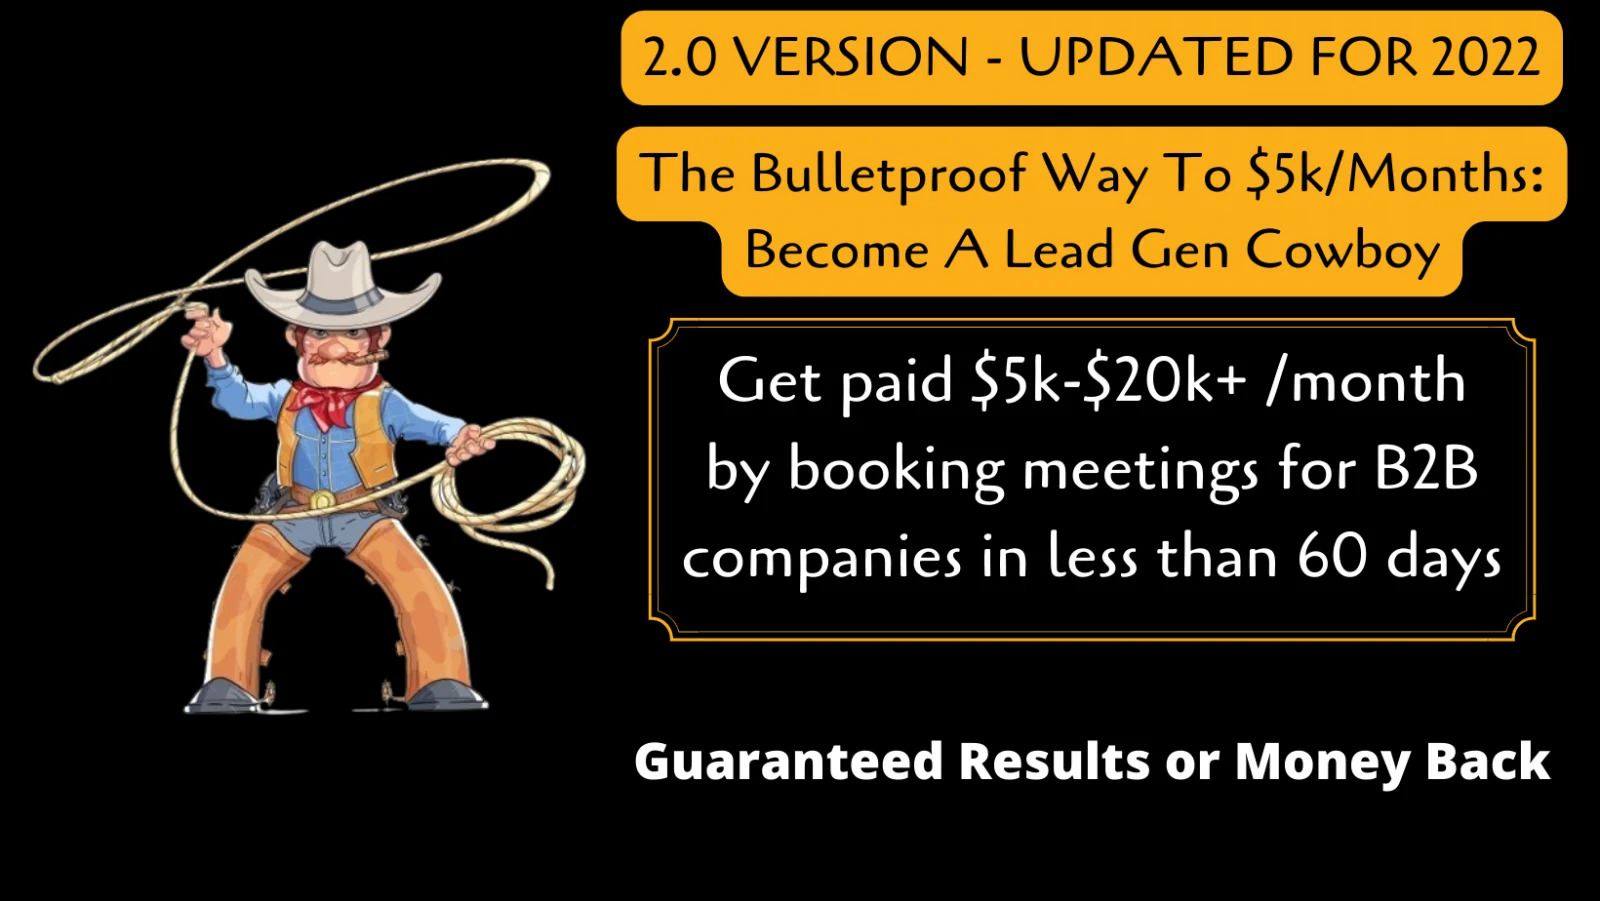 The Bulletproof Way To $5k/Months In 2022: Become A Lead Gen Cowboy Download